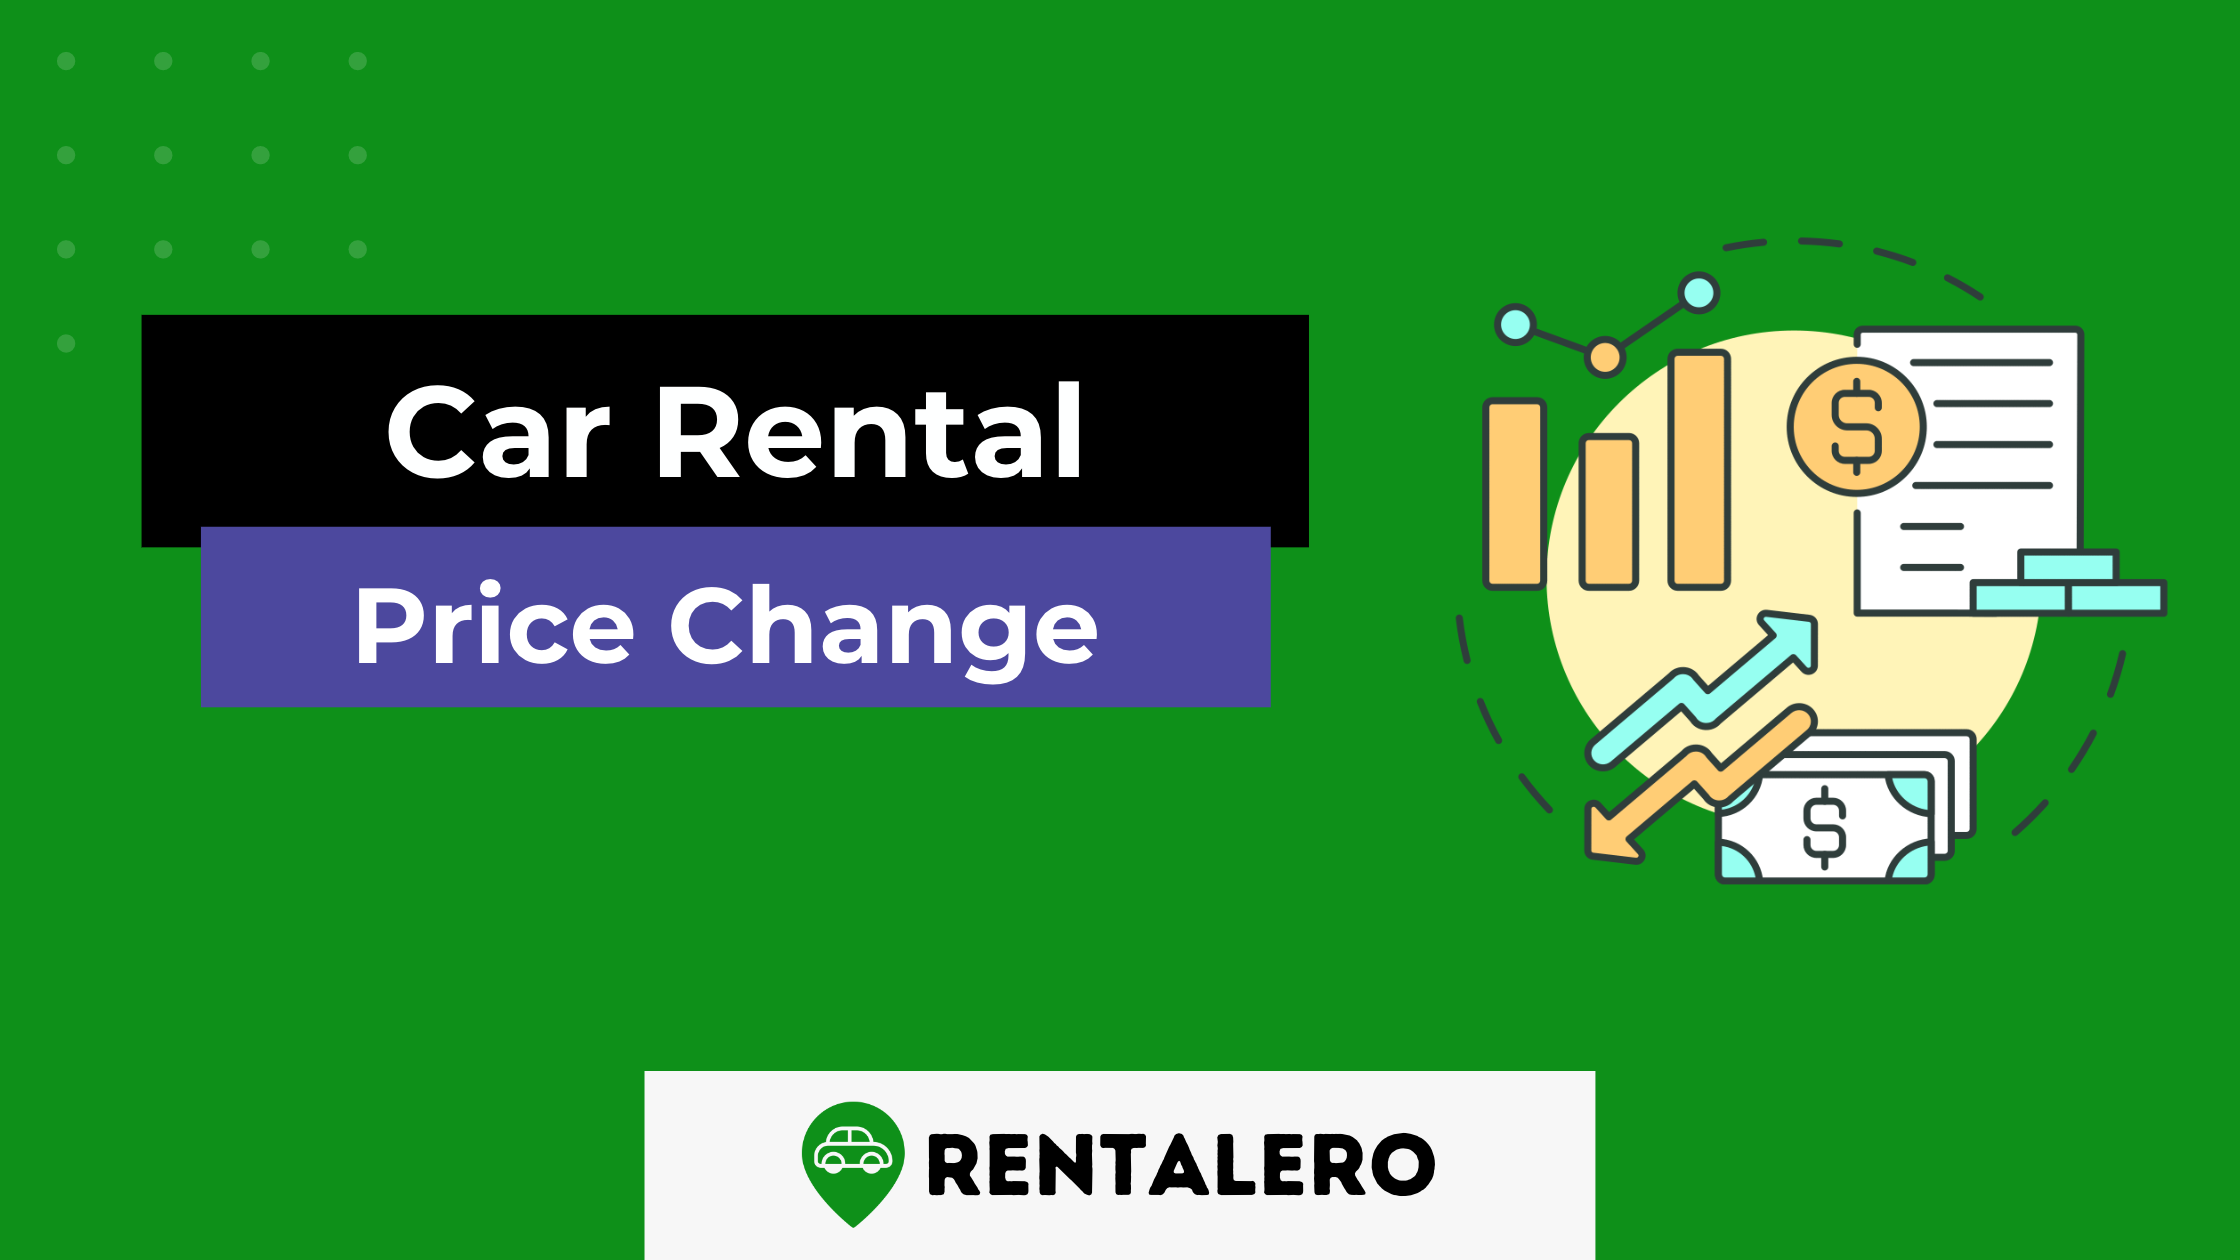 Do Car Rental Prices Change Daily? We Have Investigated